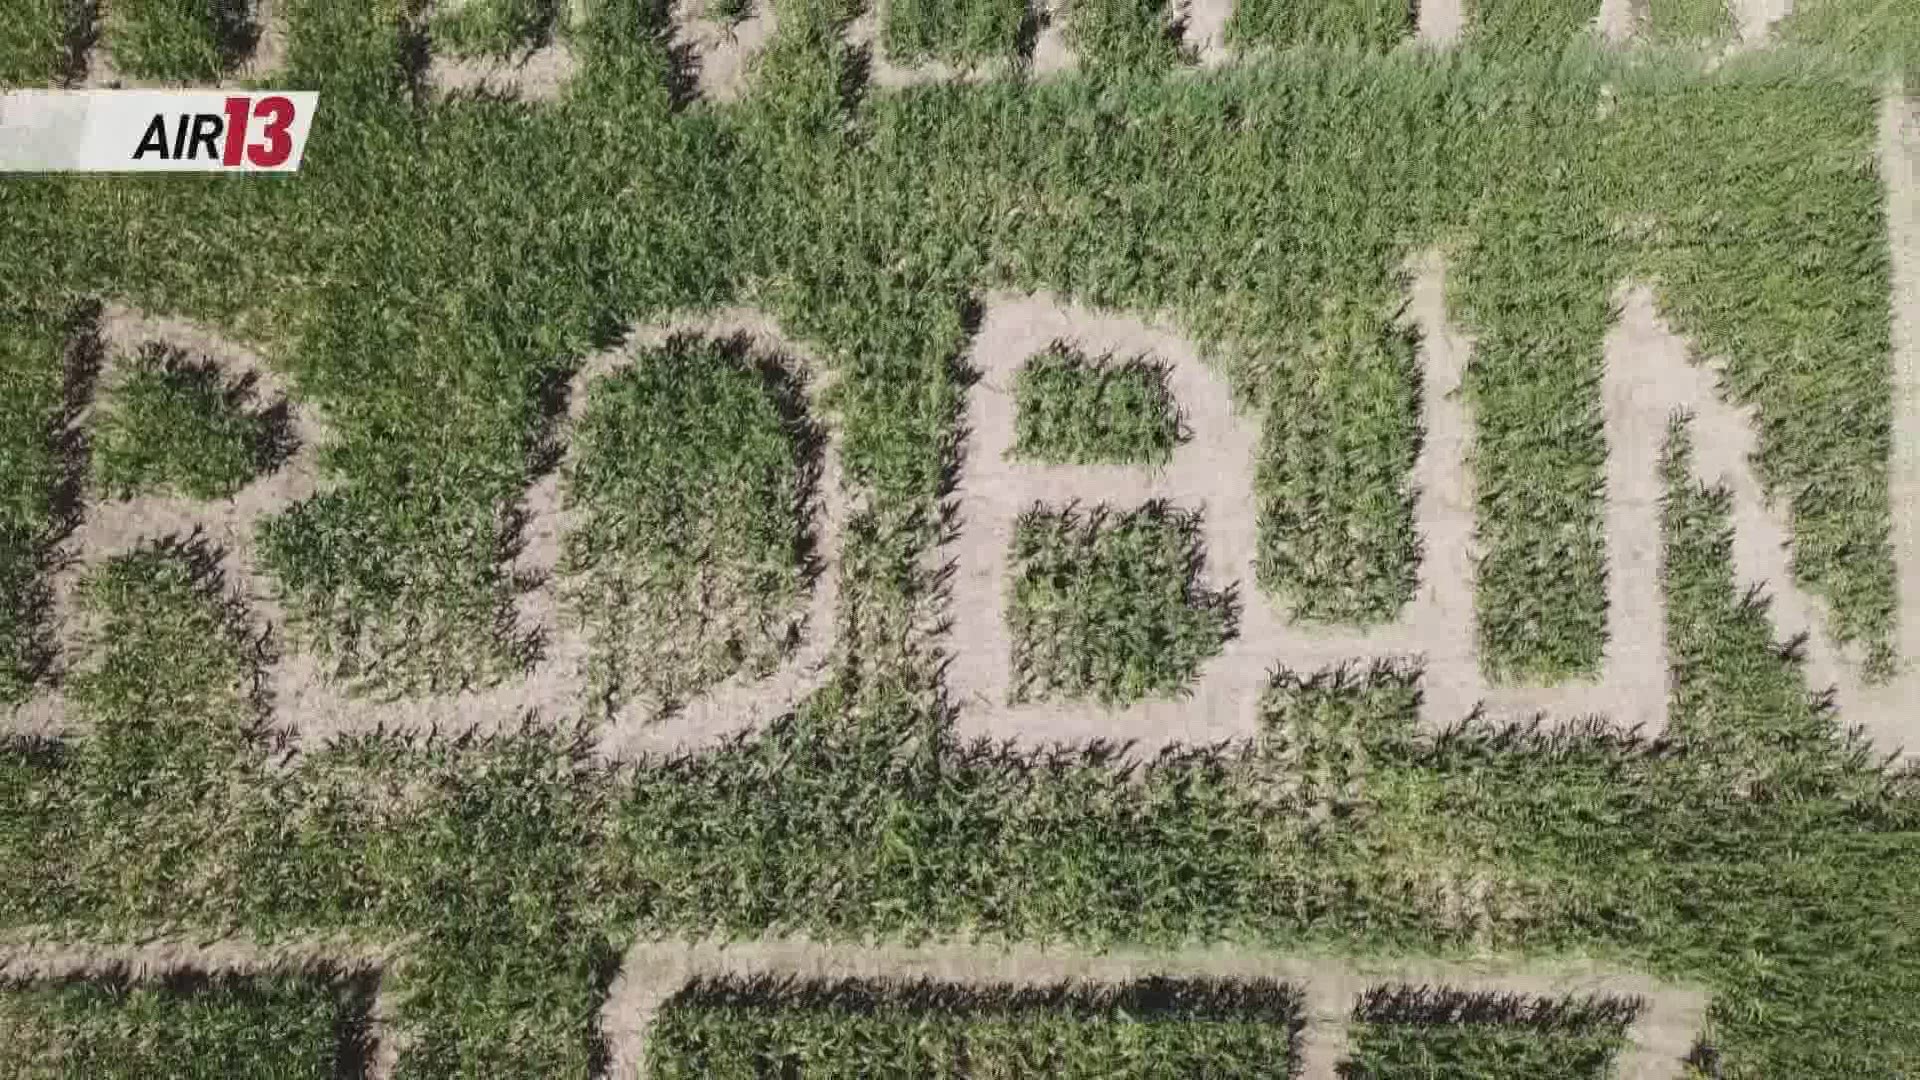 One of West Michigan's most popular destinations has a special tribute as part of their annual corn maze.